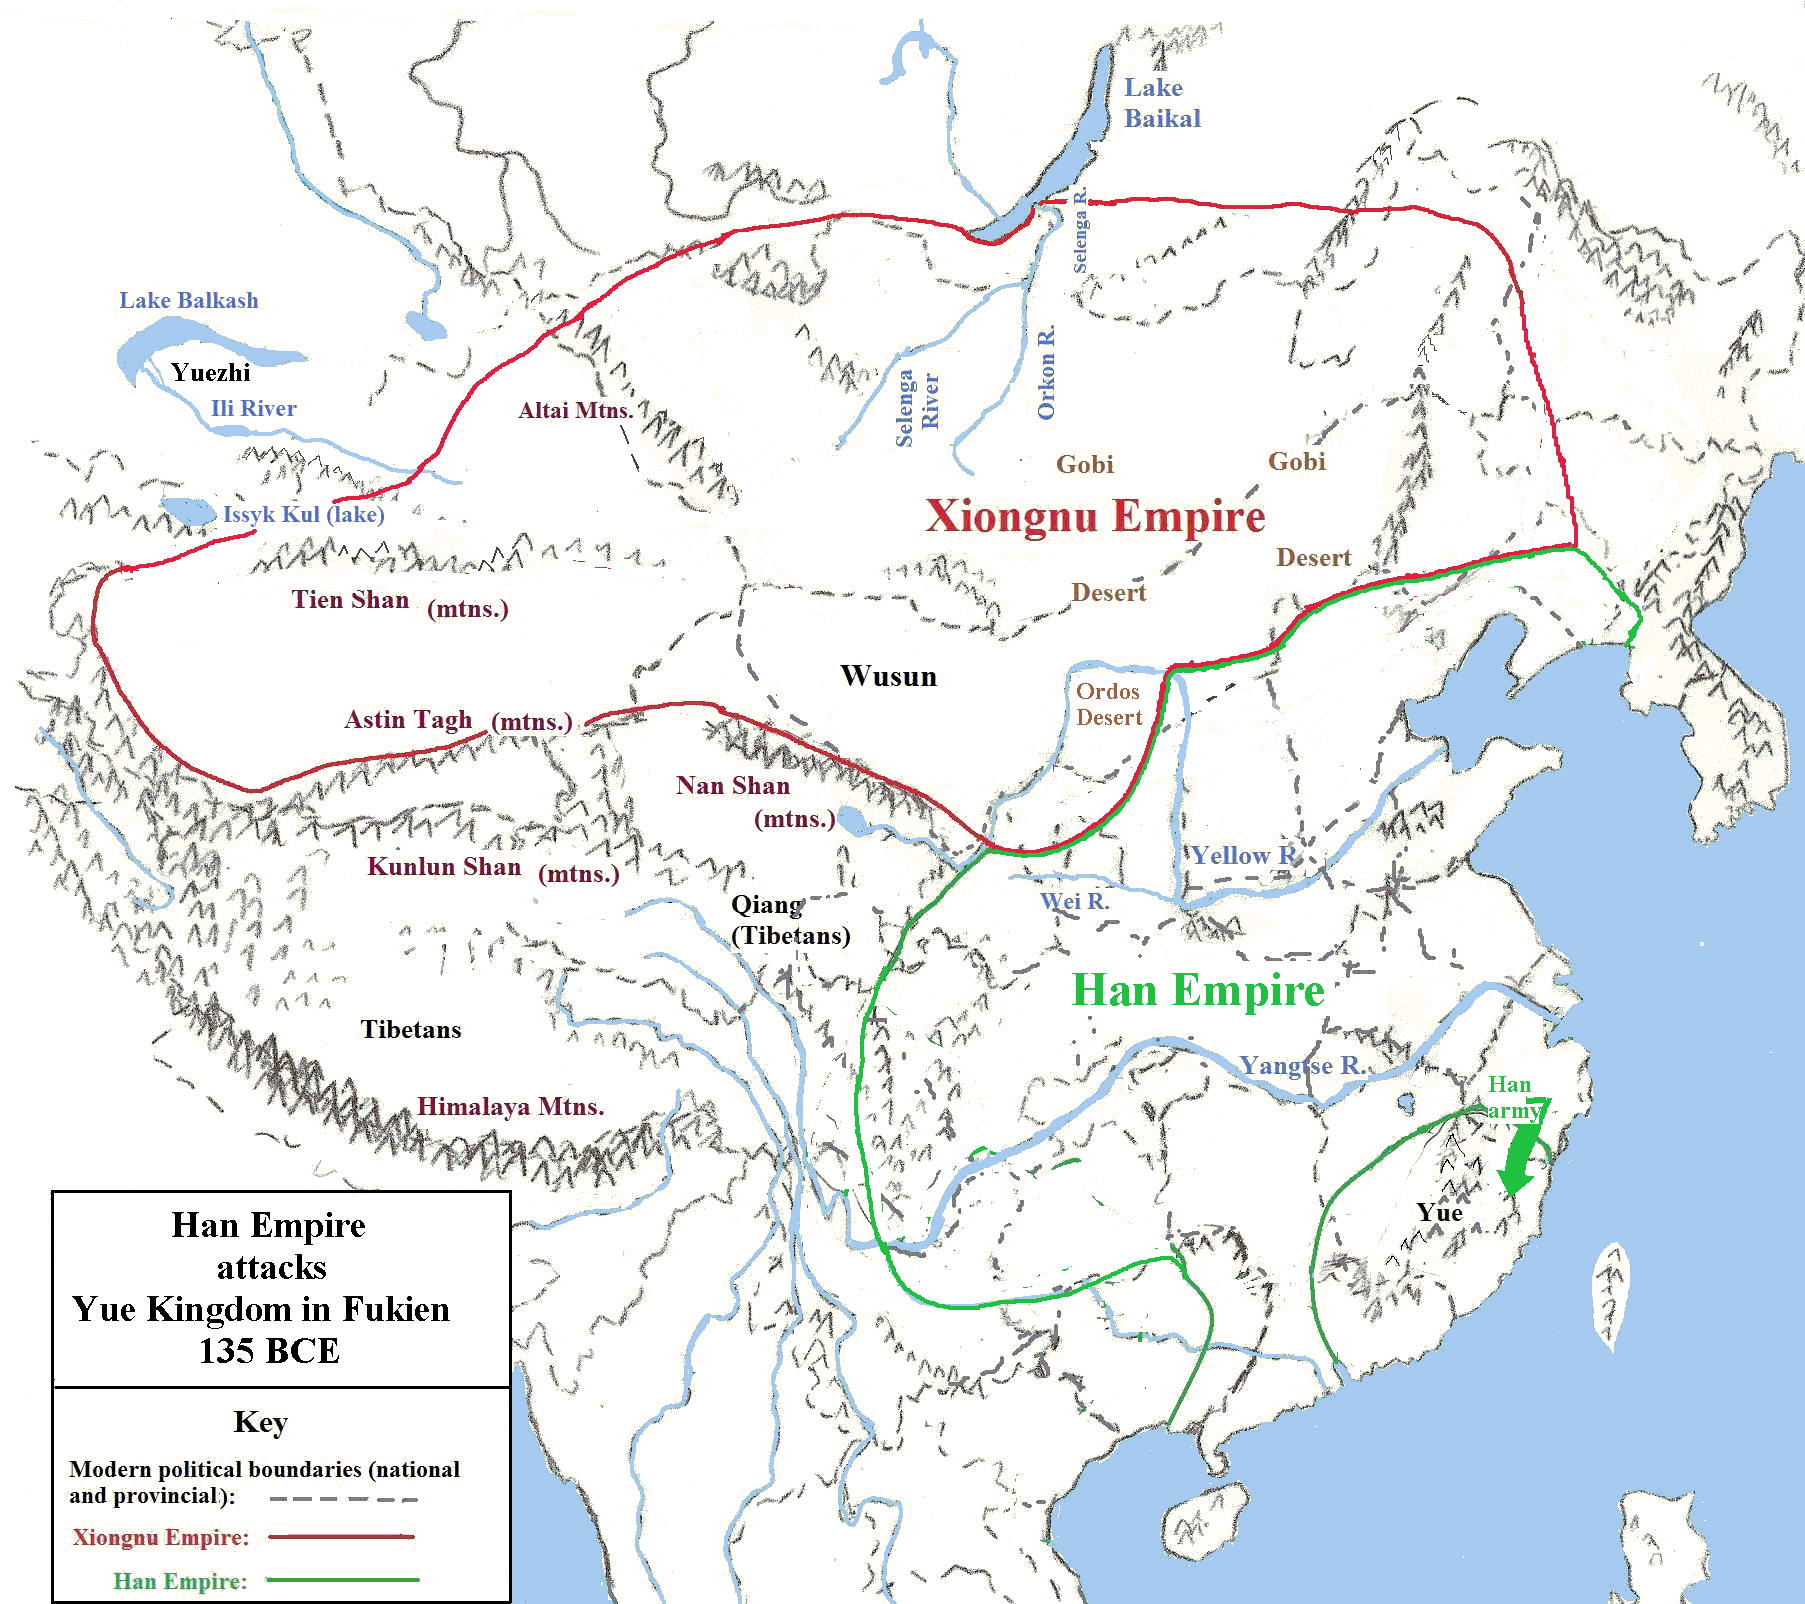 Map showing Chinese attack against Yue kingdom in Fukien in 135 BCE